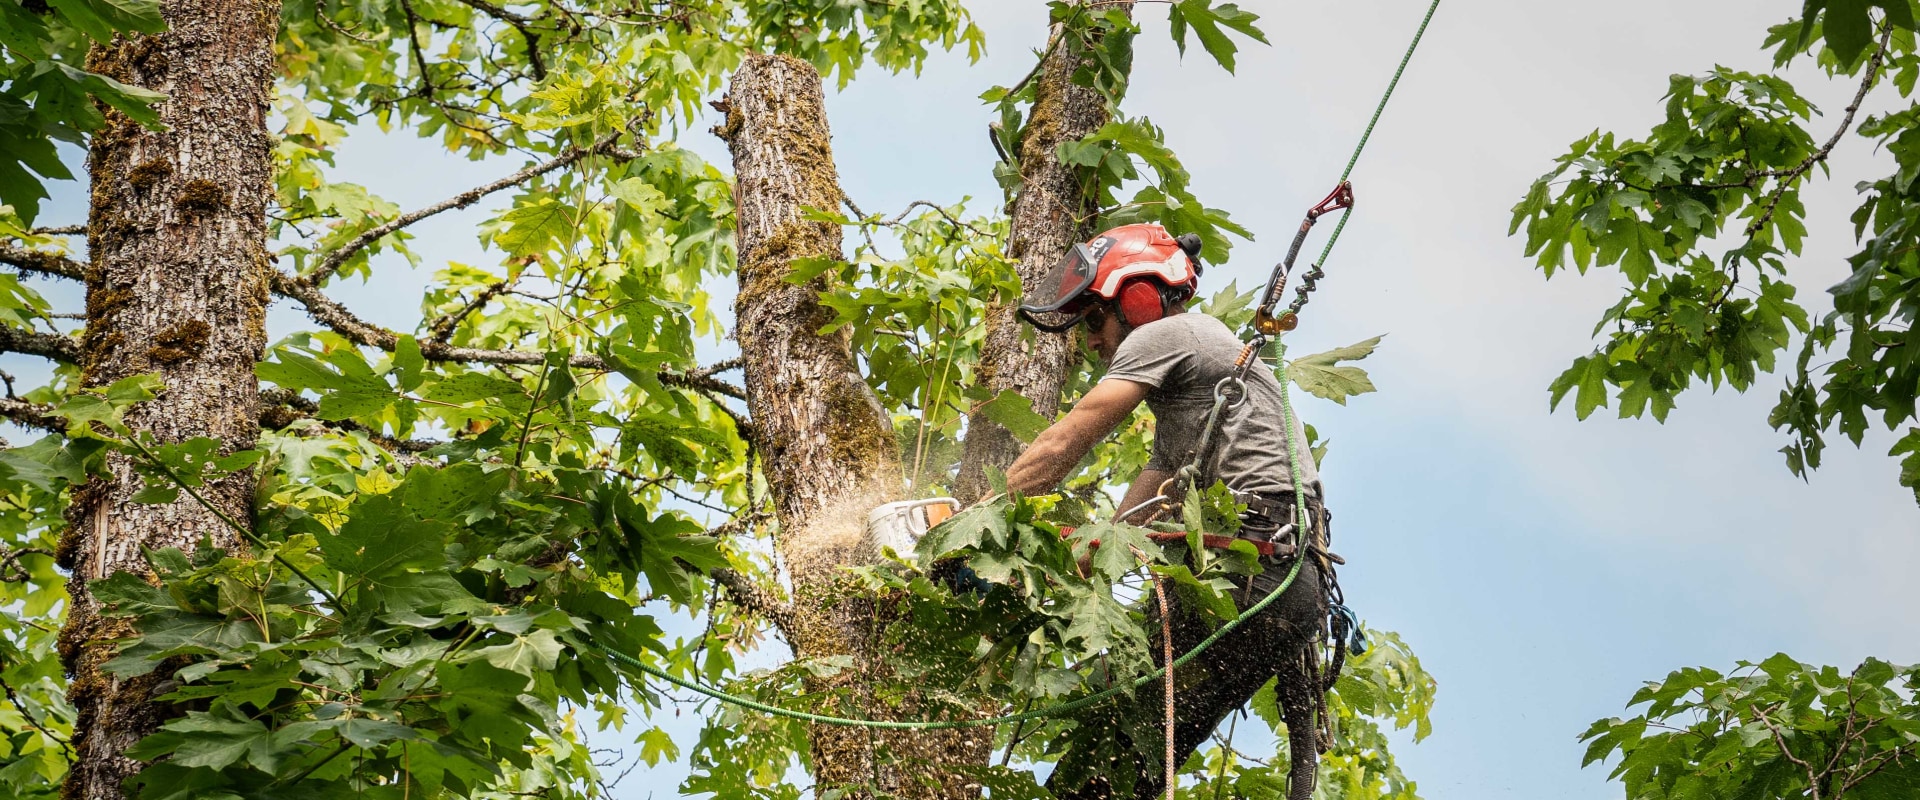 What do you call tree trimming?